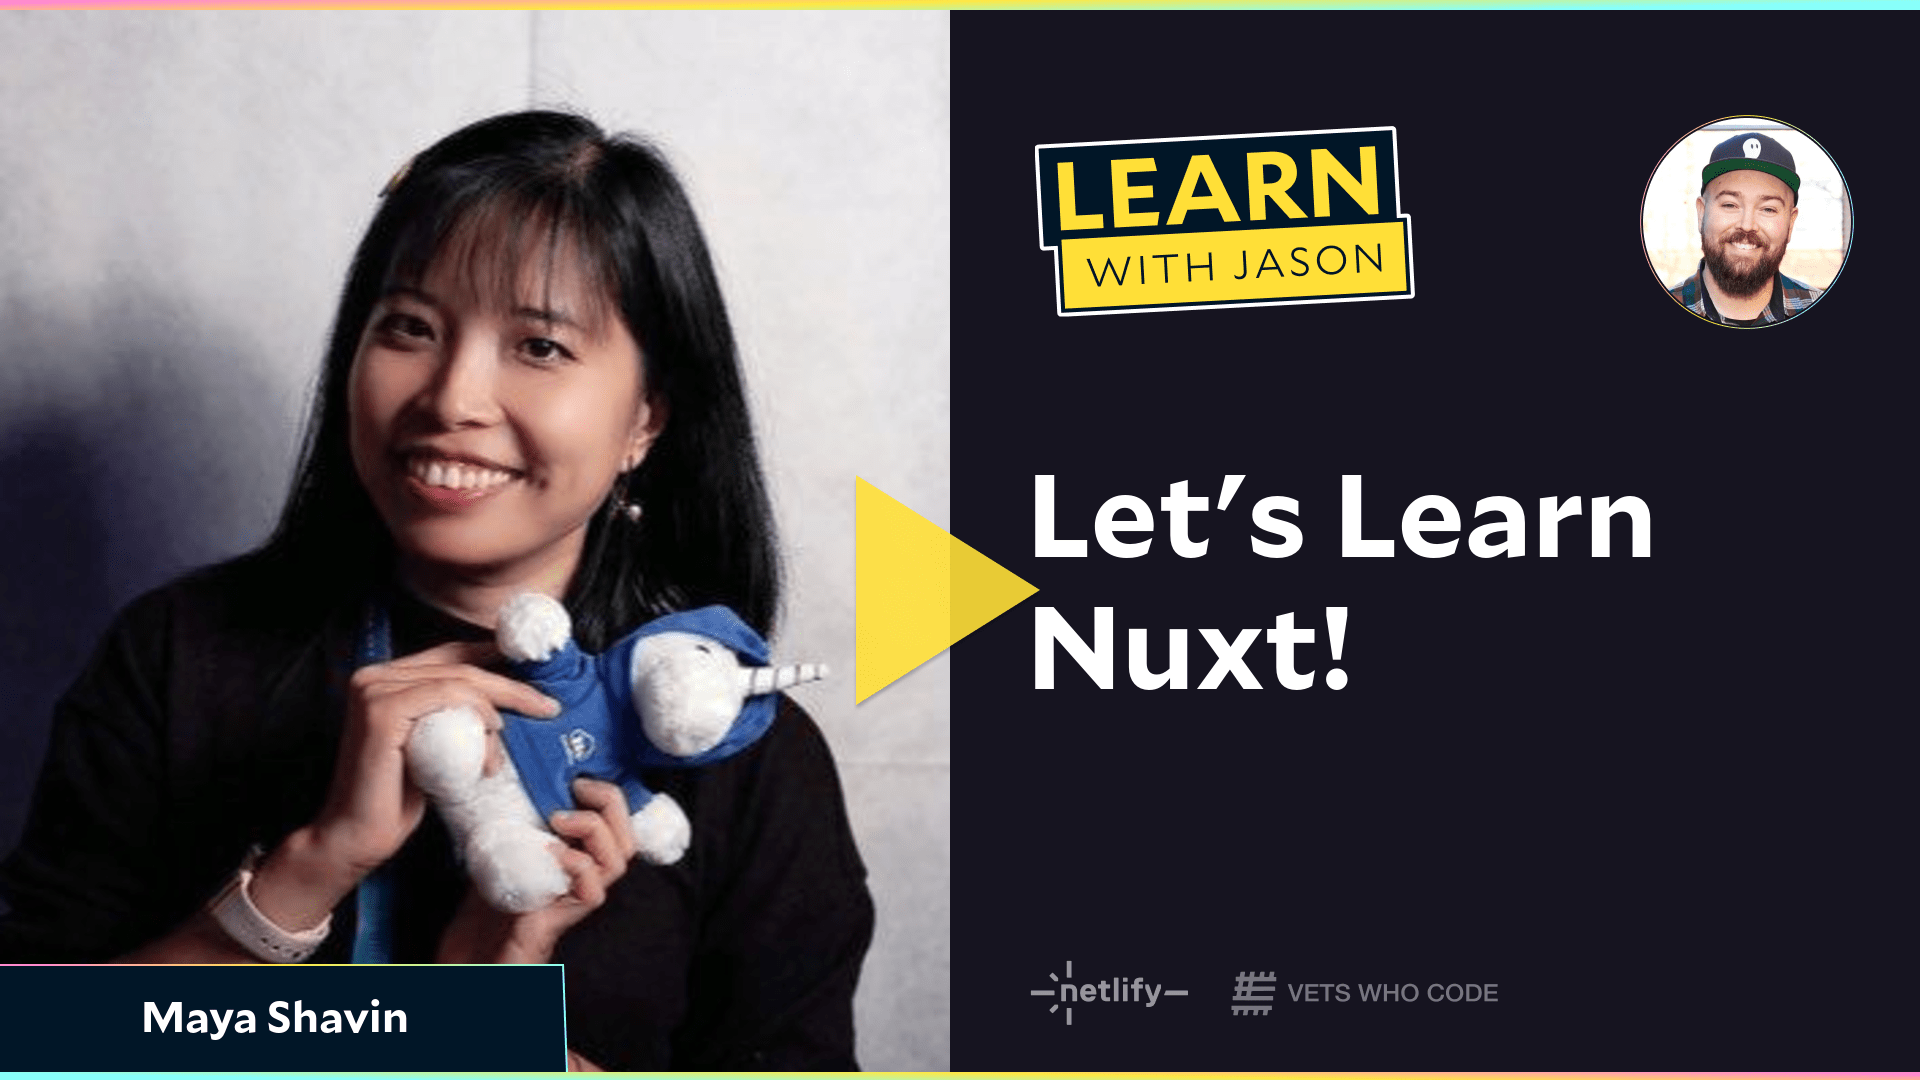 Let's Learn Nuxt! (with Maya Shavin)